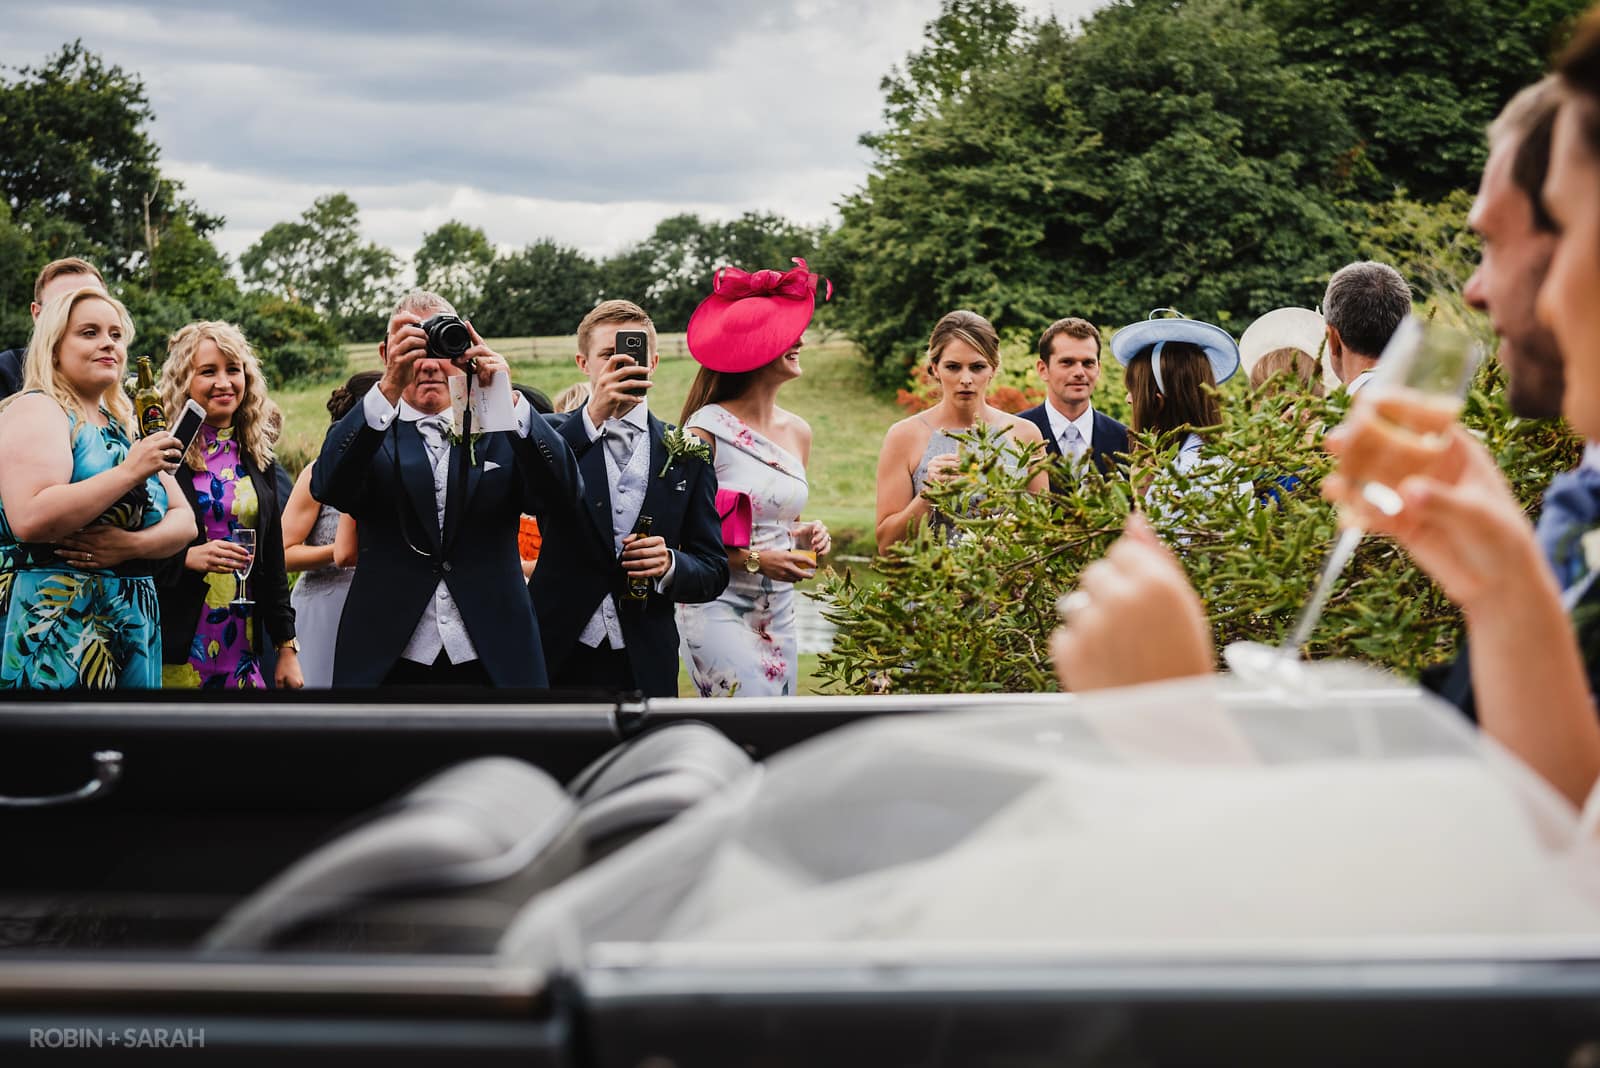 Wedding guests take photos of bride and groom in car